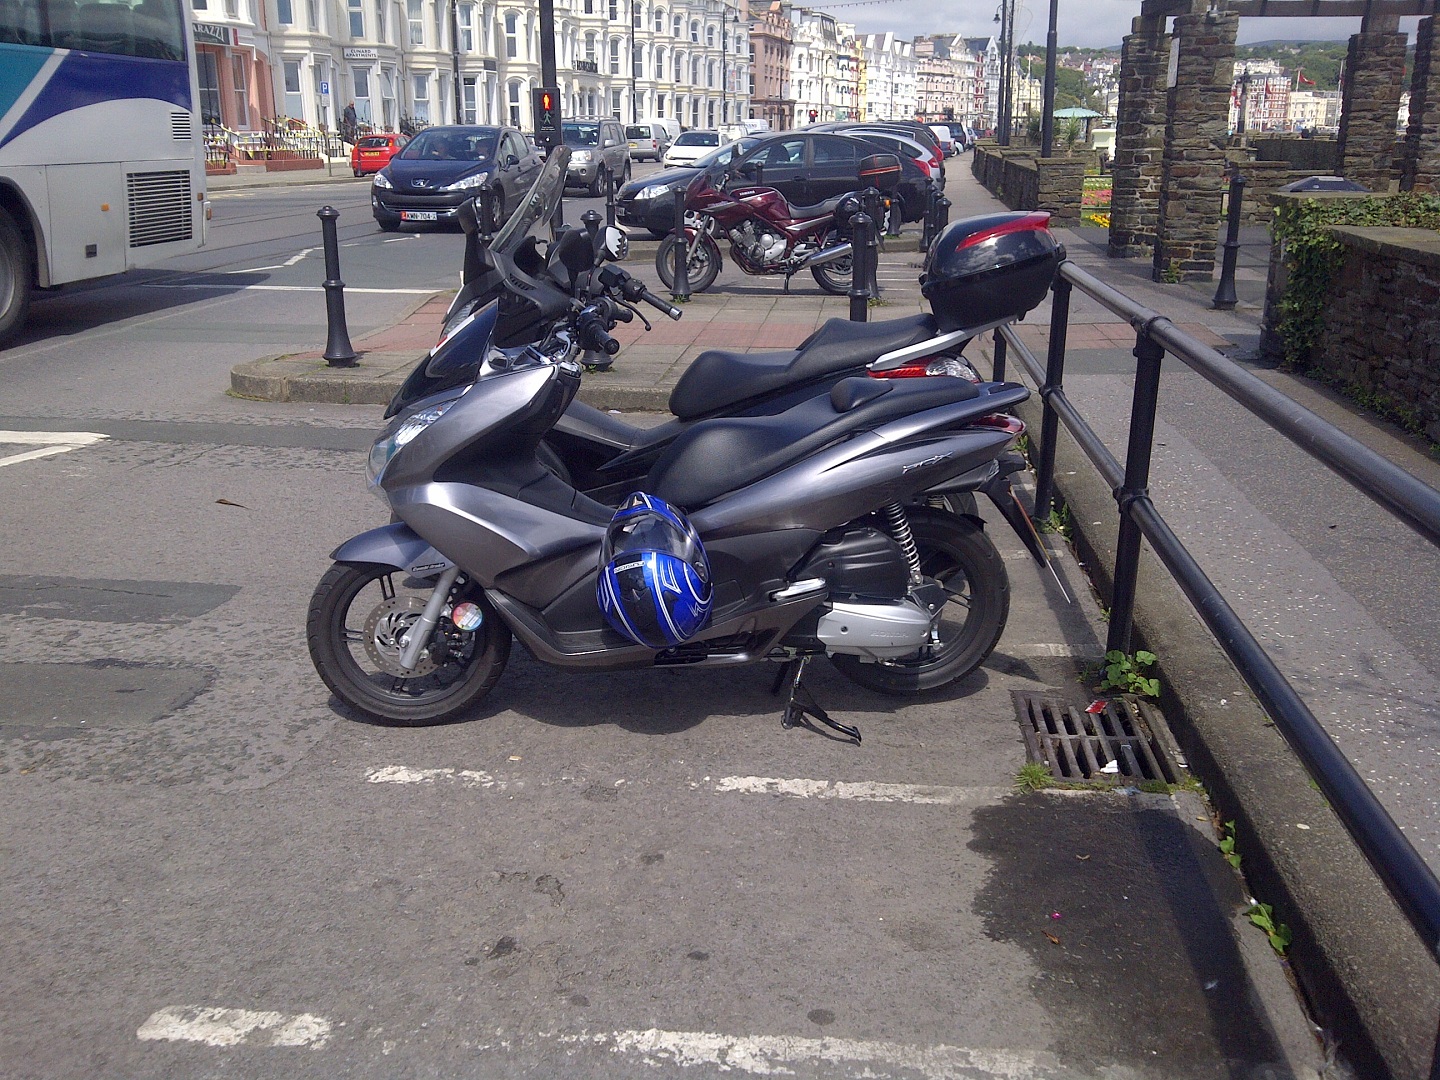 Pcx in front